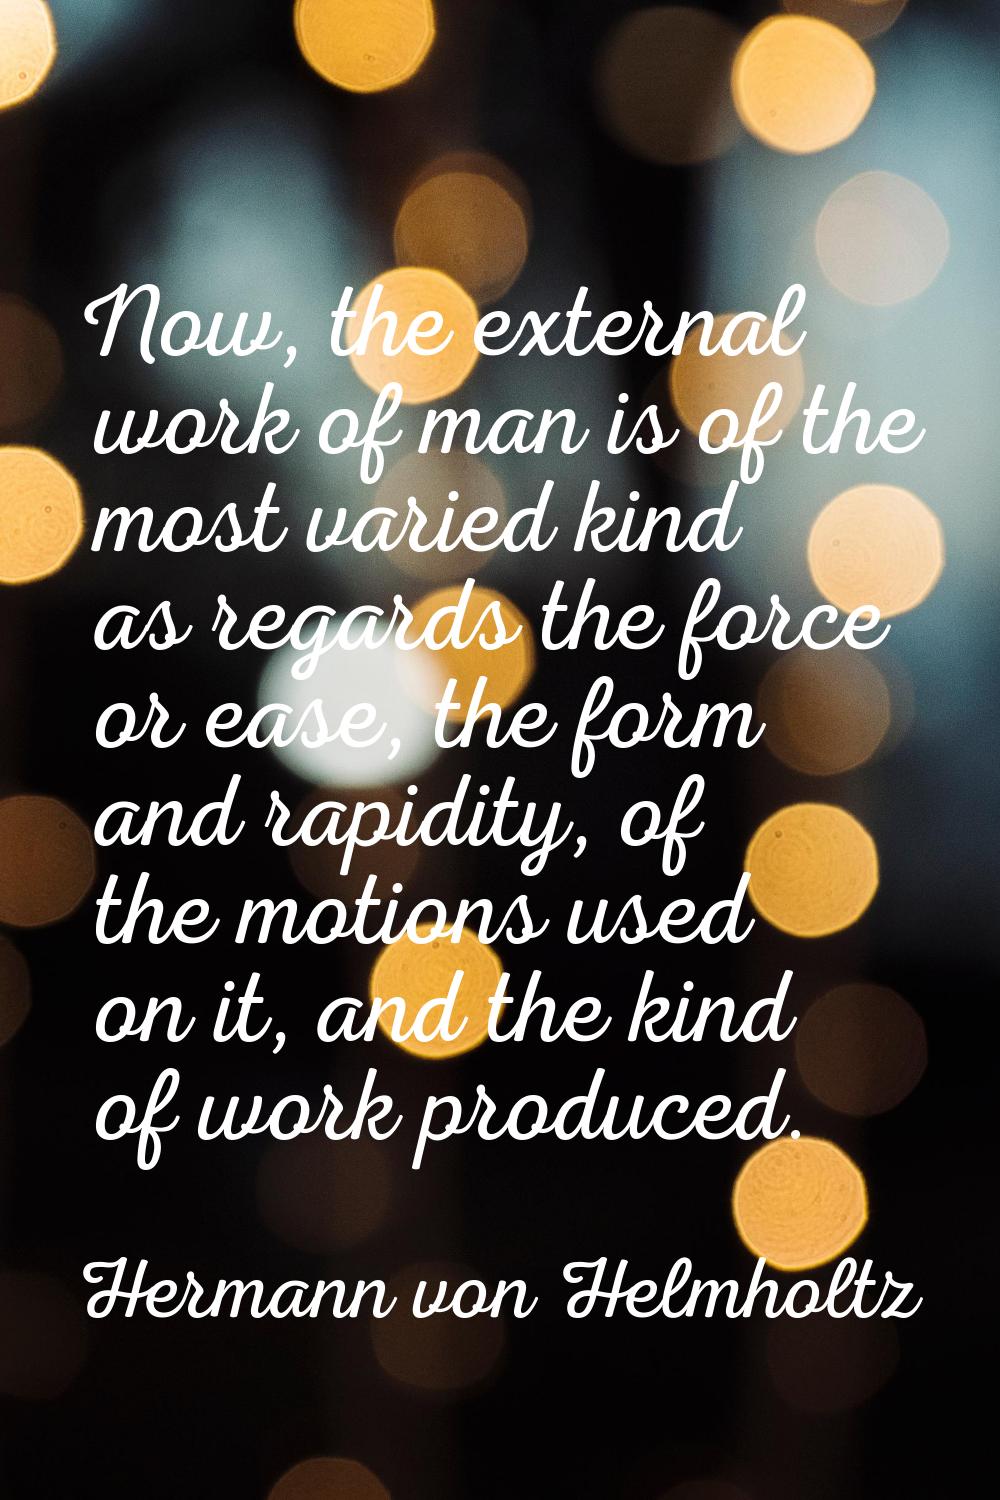 Now, the external work of man is of the most varied kind as regards the force or ease, the form and